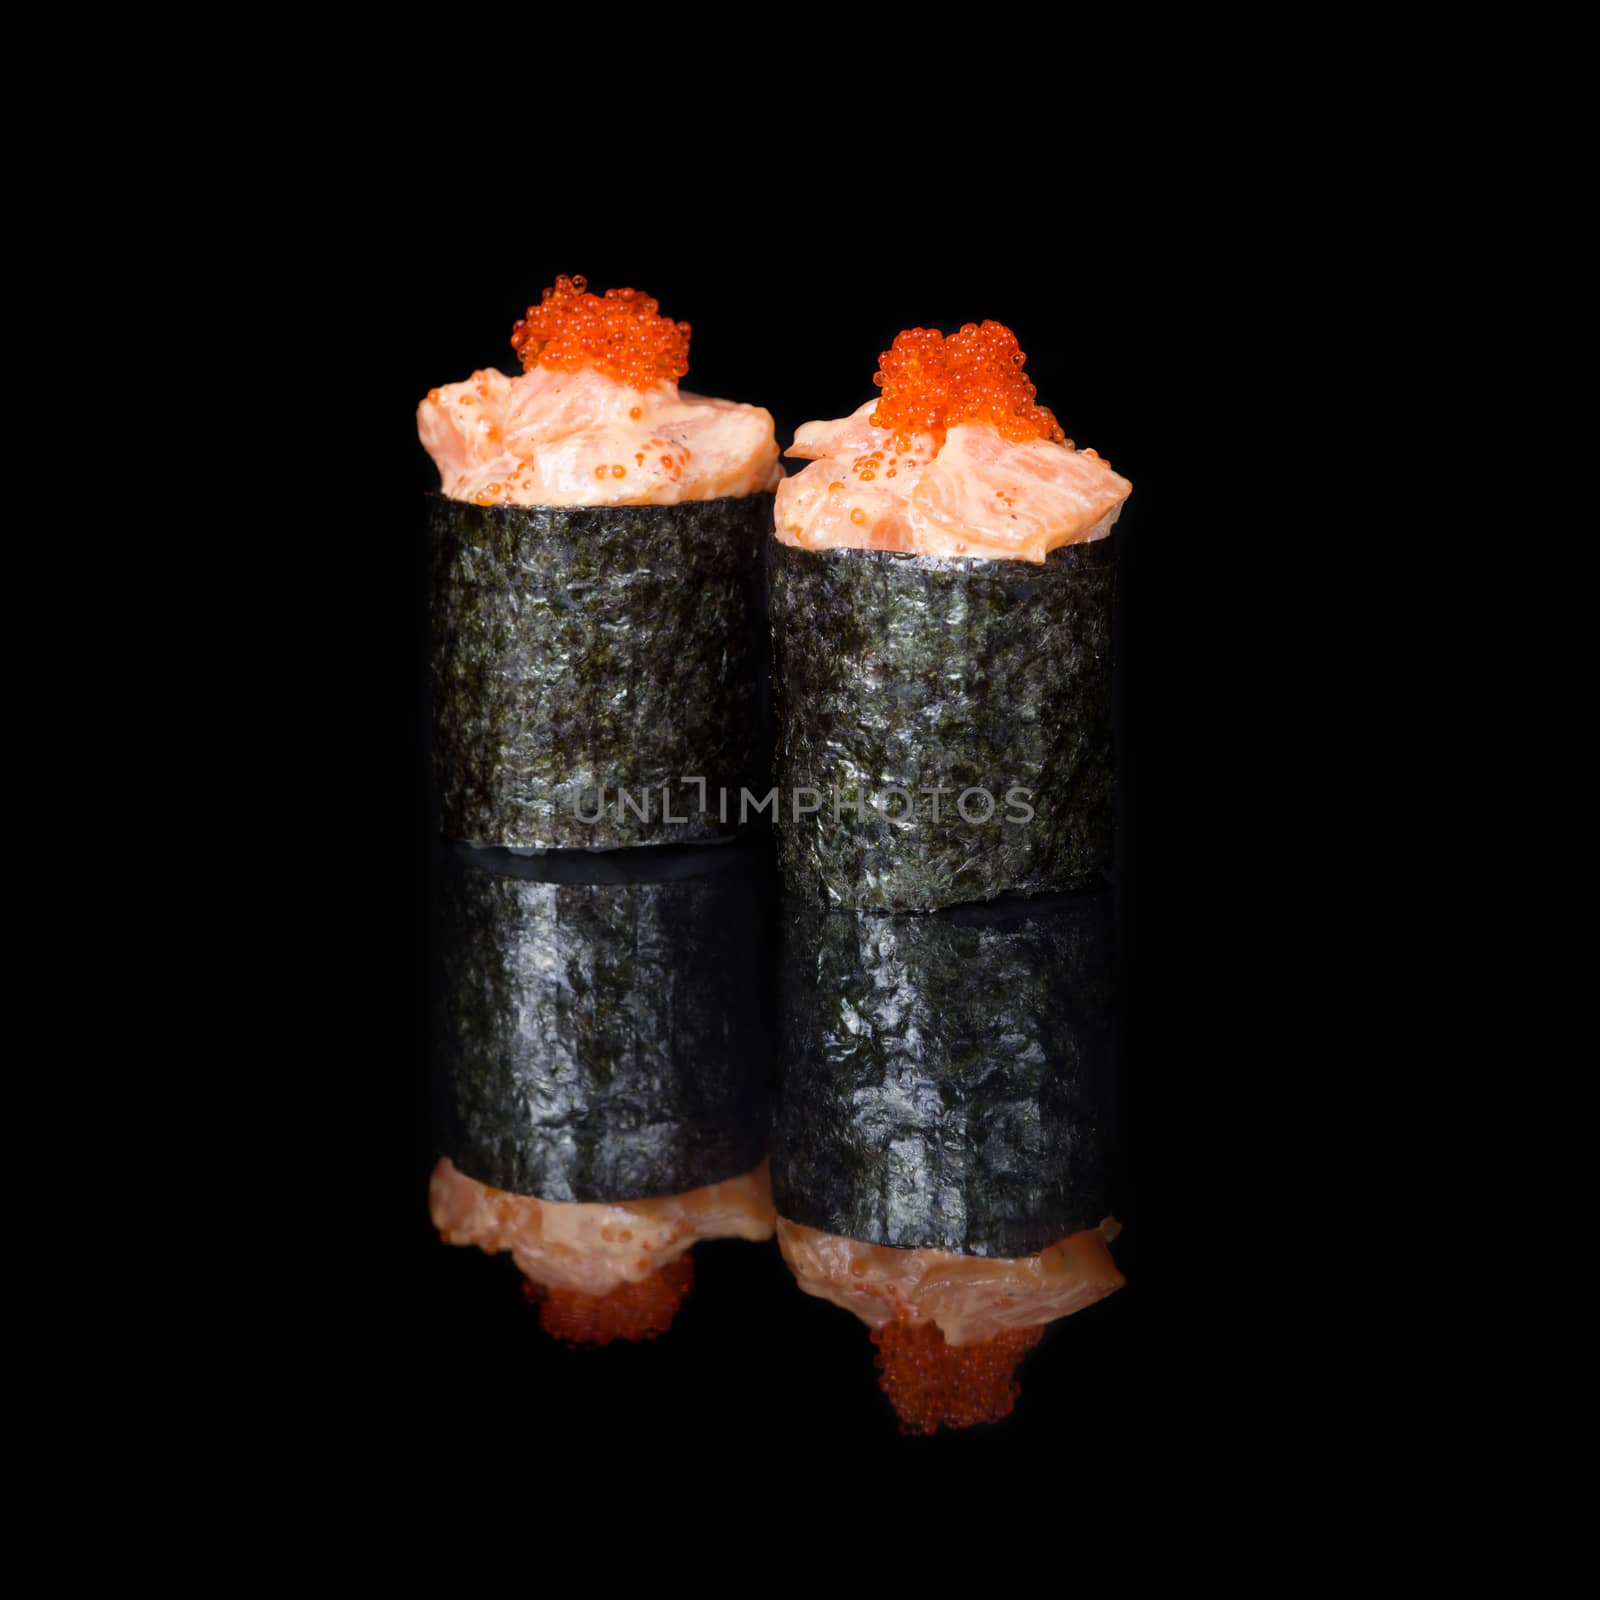 Vertical roll with salmon and caviar on black background